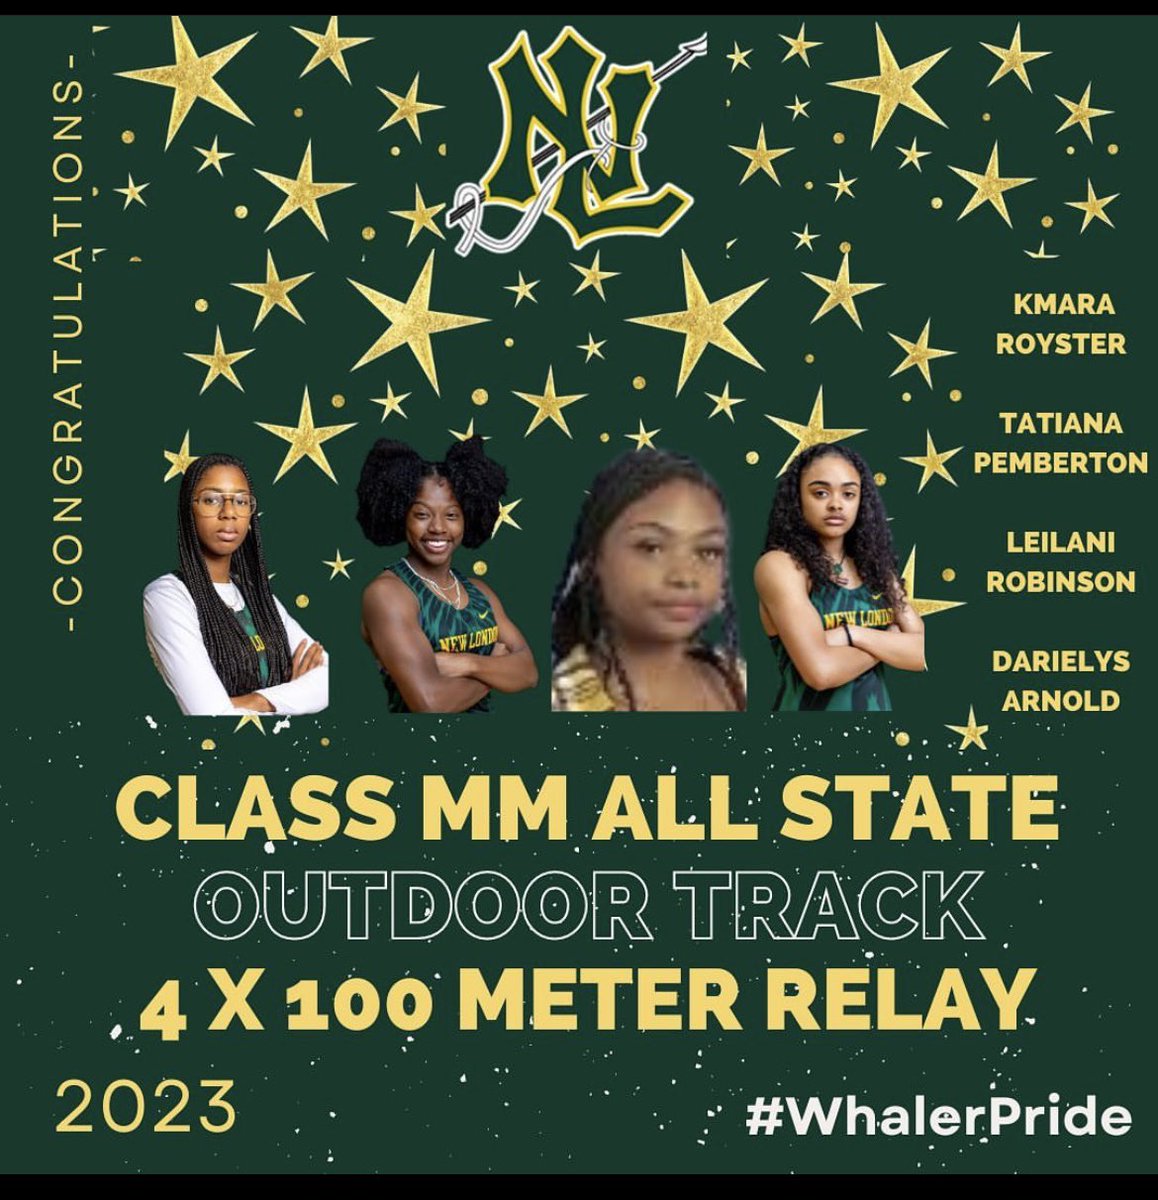 •National Qualifier in the 100m and Long Jump- Darielys Arnold

CLASS MM AND STATE OPEN LONG JUMP CHAMP- Sophomore, Darielys Arnold

•CLASS MM 4x100 CHAMPS-
Sr. Kmara Royster 
So. Tatiana PEMBERTON
So. Leilani Robinson 
So. Darielys Arnold 

#cttrack